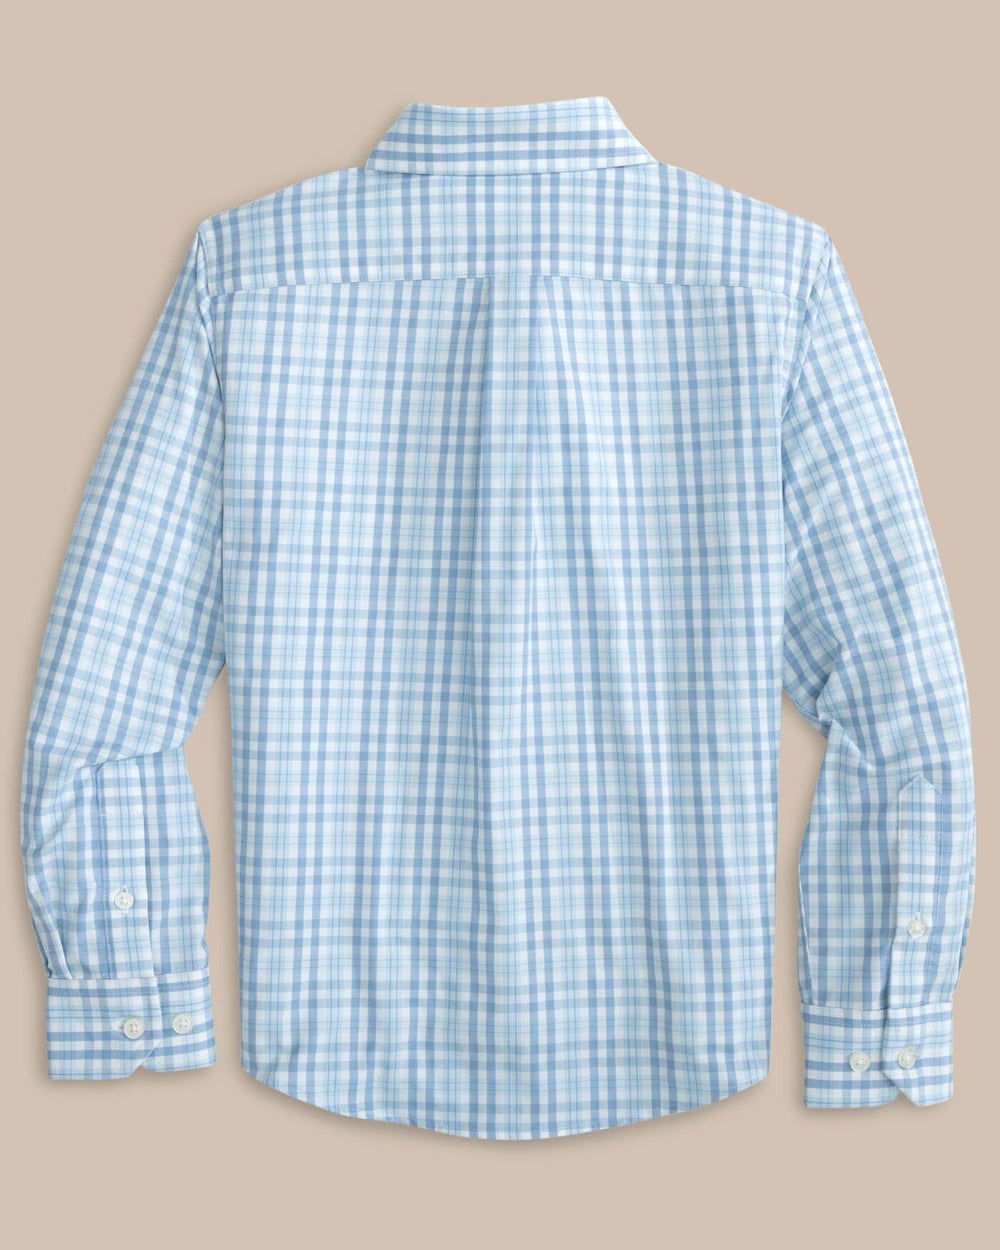 The back view of the Southern Tide Boys Haywood Plaid Intercoastal Long Sleeve Sportshirt by Southern Tide - Dream Blue